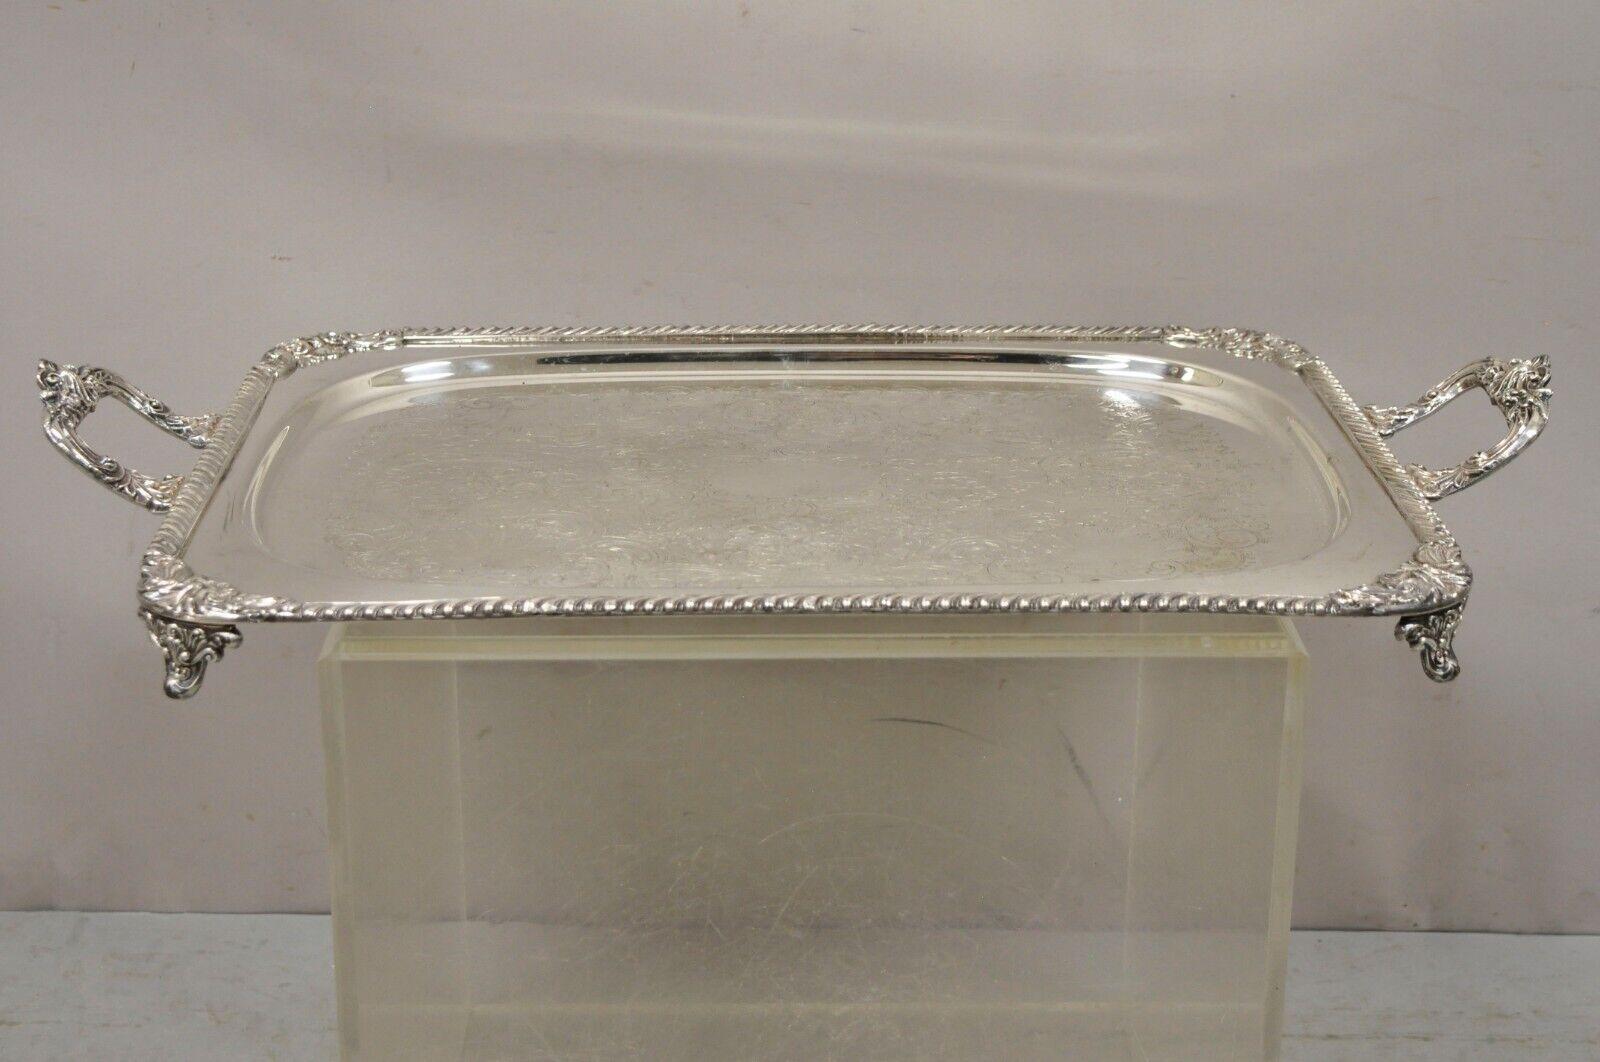 Ornate English Victorian twin handle heavy silver plate platter tray. Item features heavy silver plated construction, ornate etching to center, ornate twin handles, raised on ornate feet, original stamp, quality craftsmanship, great style and form,